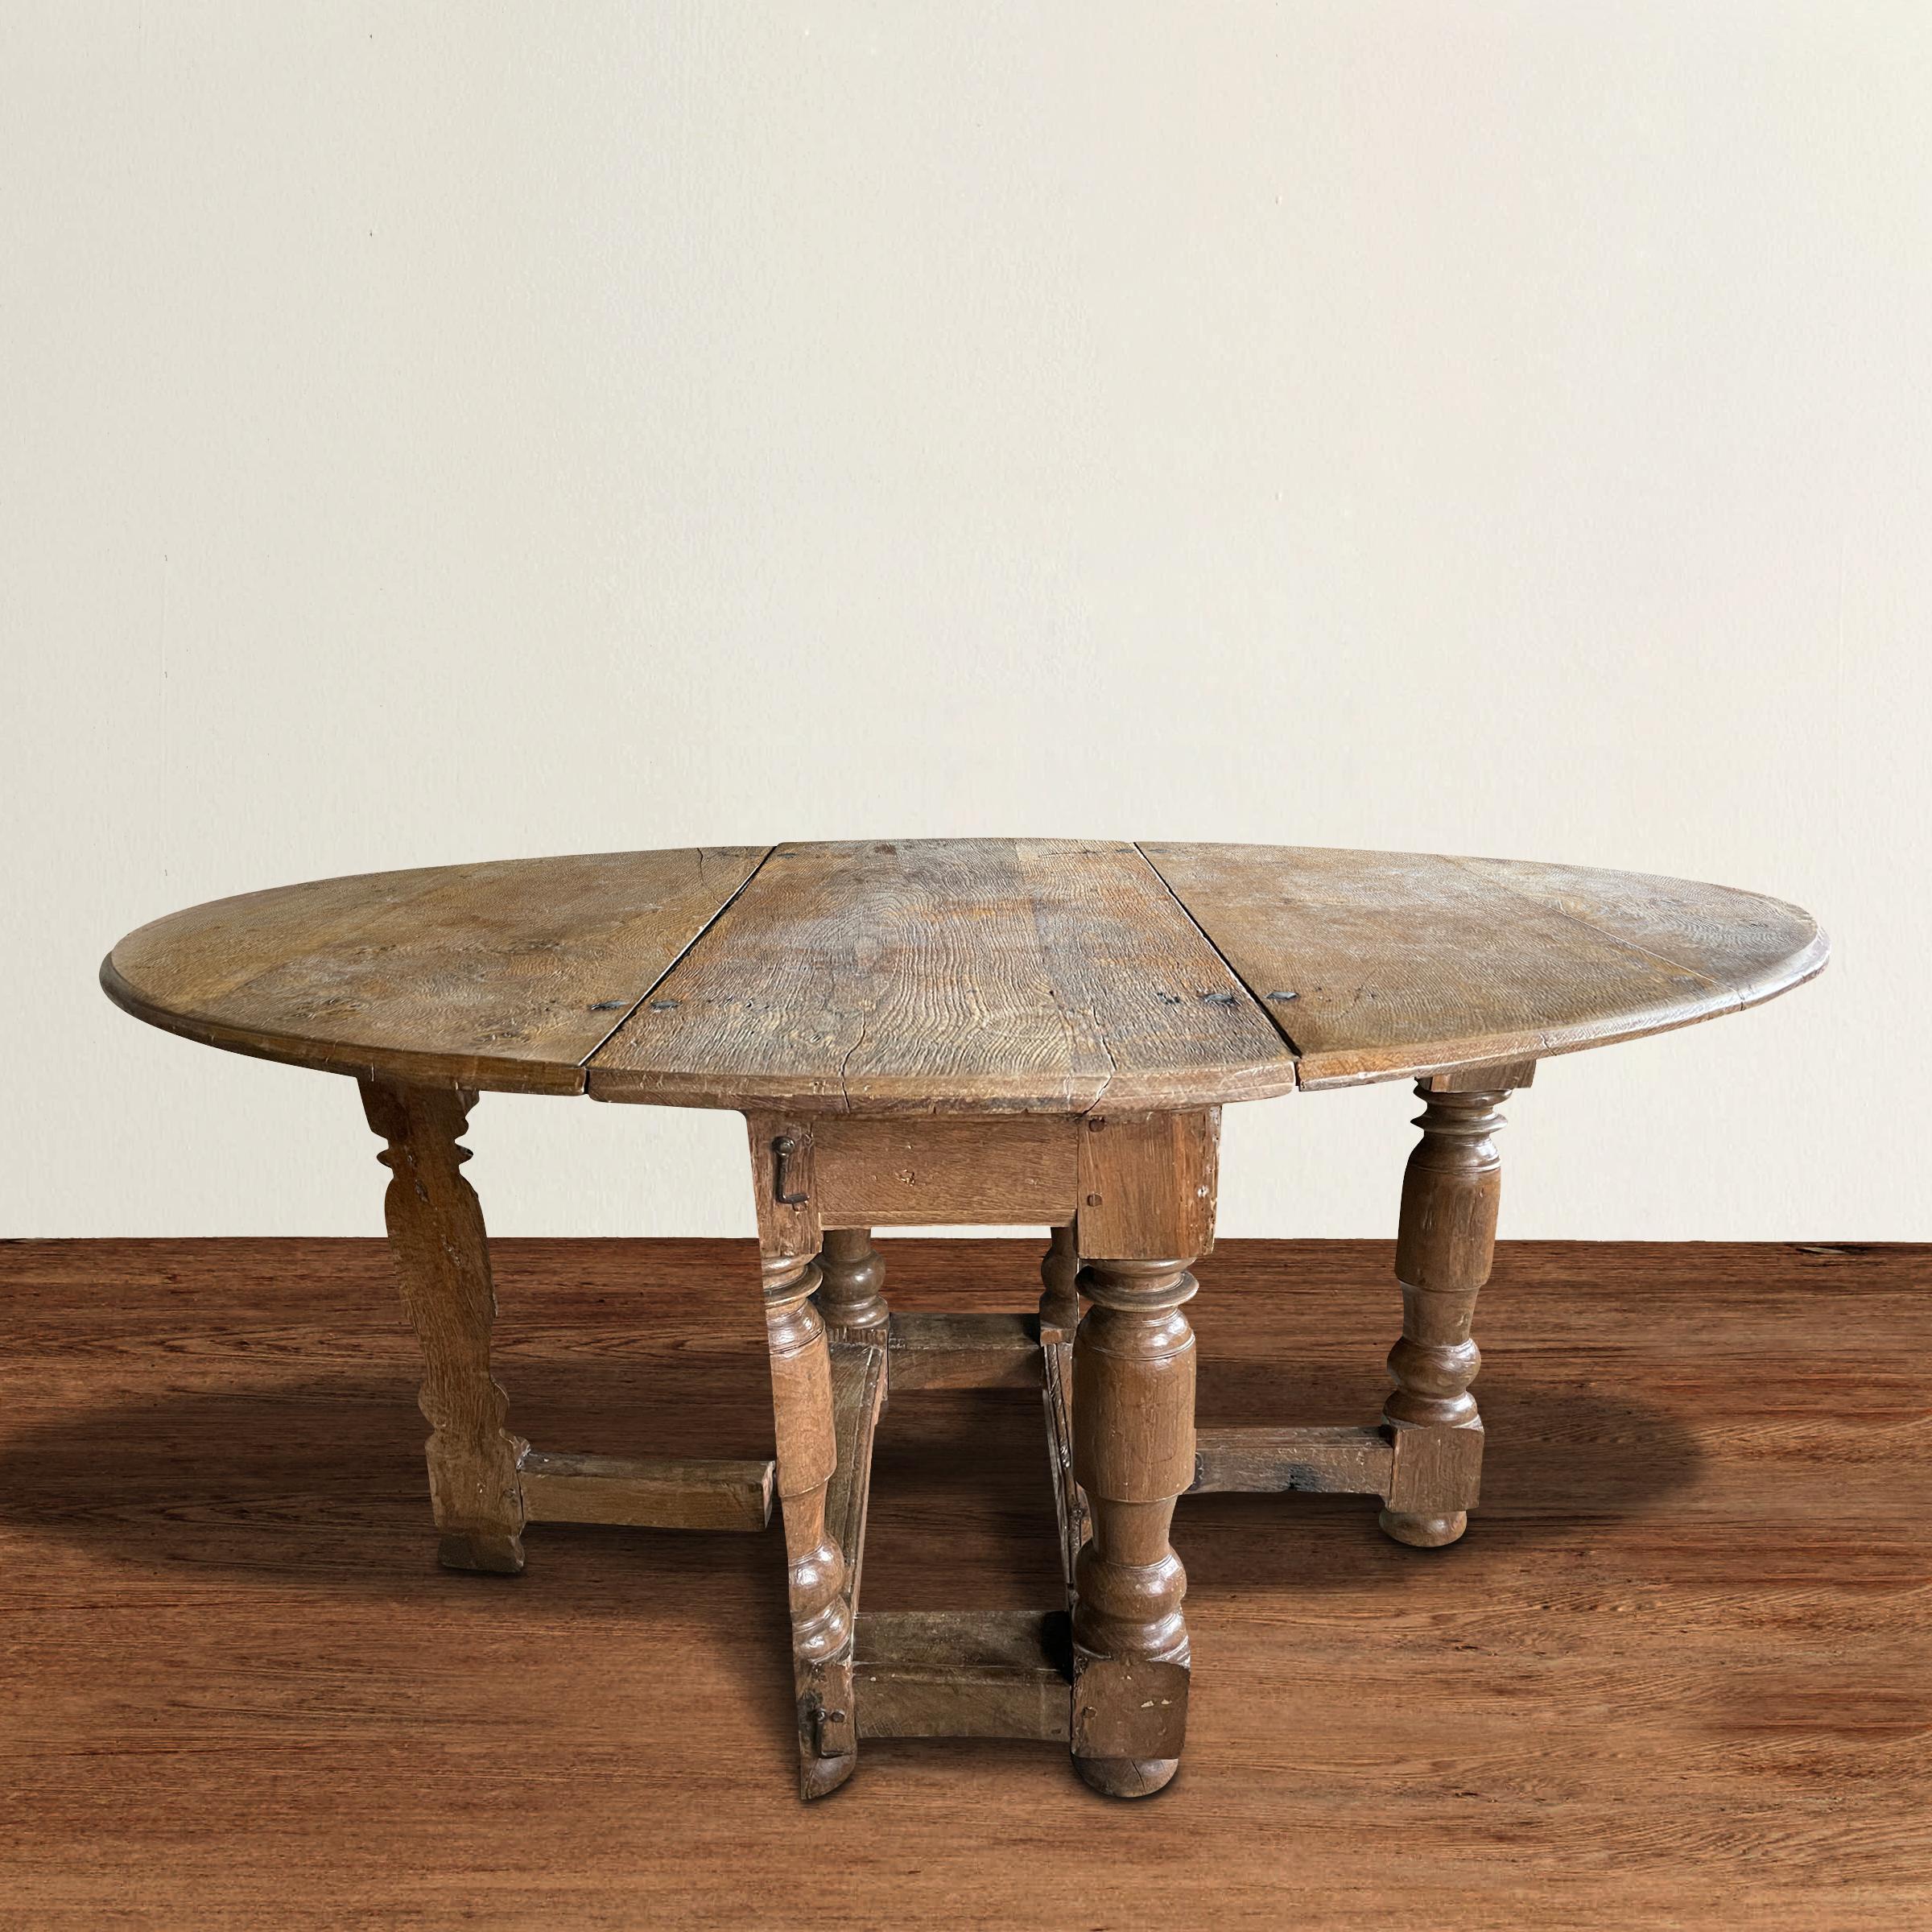 An exceptional 17th century Danish Baroque oak oval gateleg table with four skilfully turned legs, two of them being cut in half vertically allow them to swing open the gatelegs. The table is very versatile and can be used as a small dining or